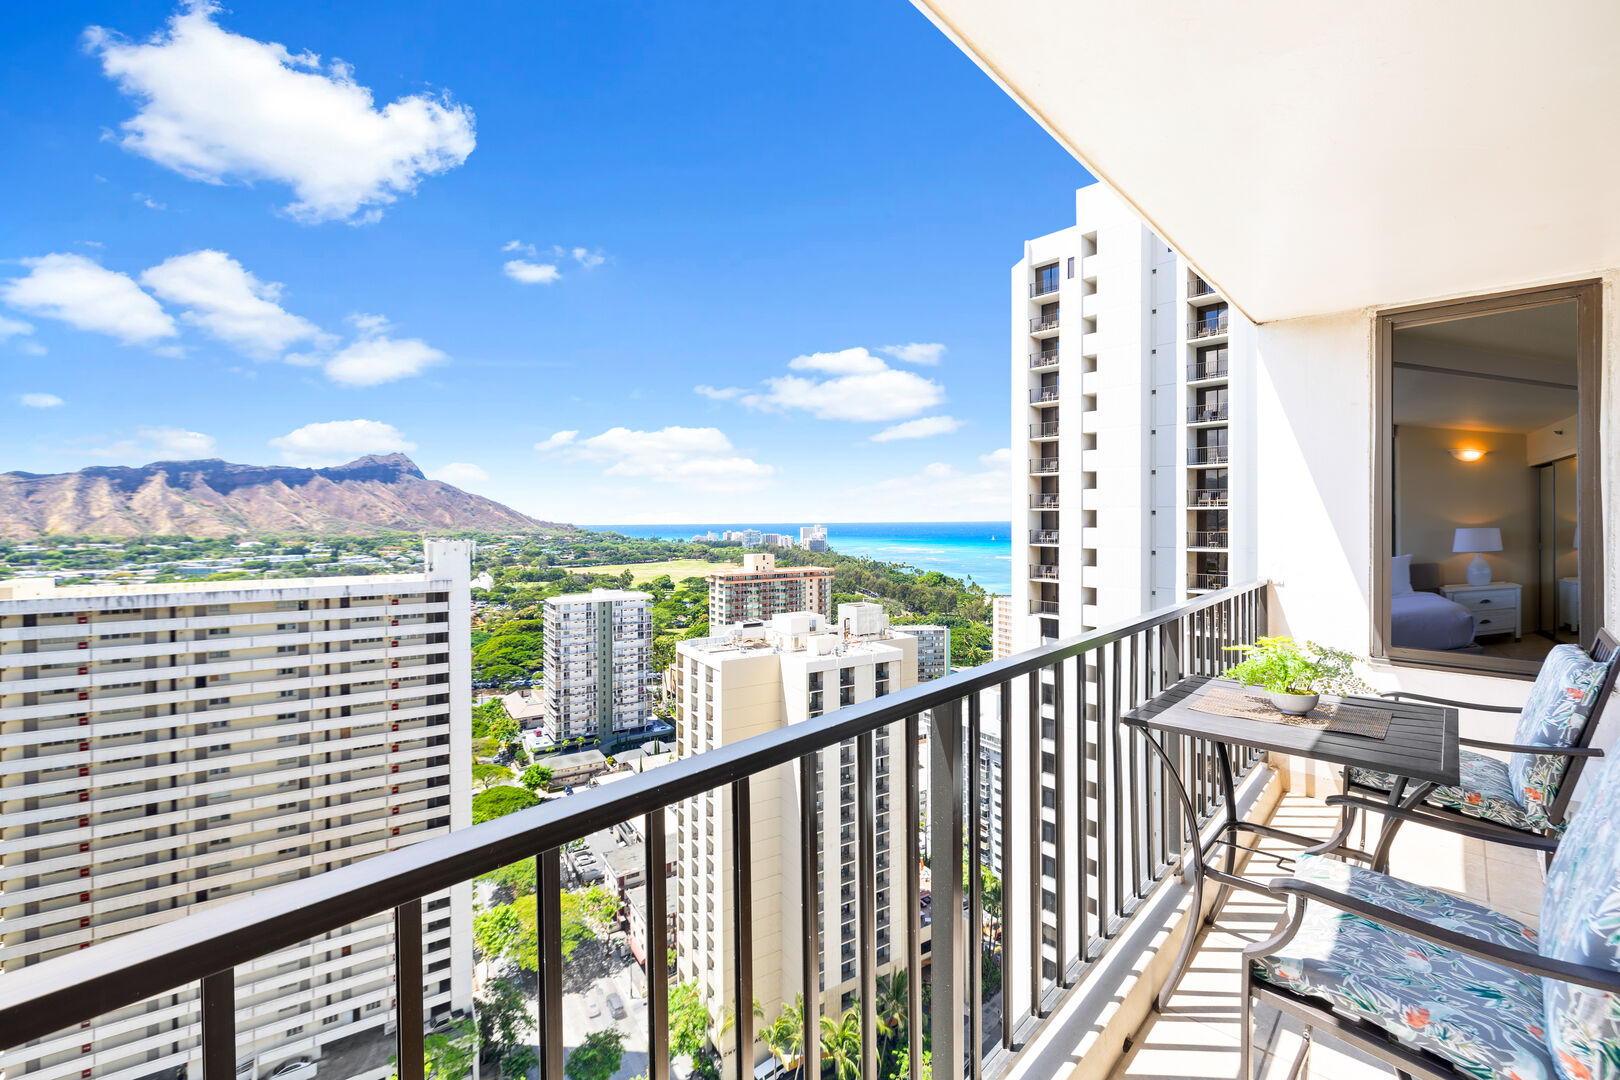 Have a refreshing view of the Diamond head and ocean from your own private lanai!